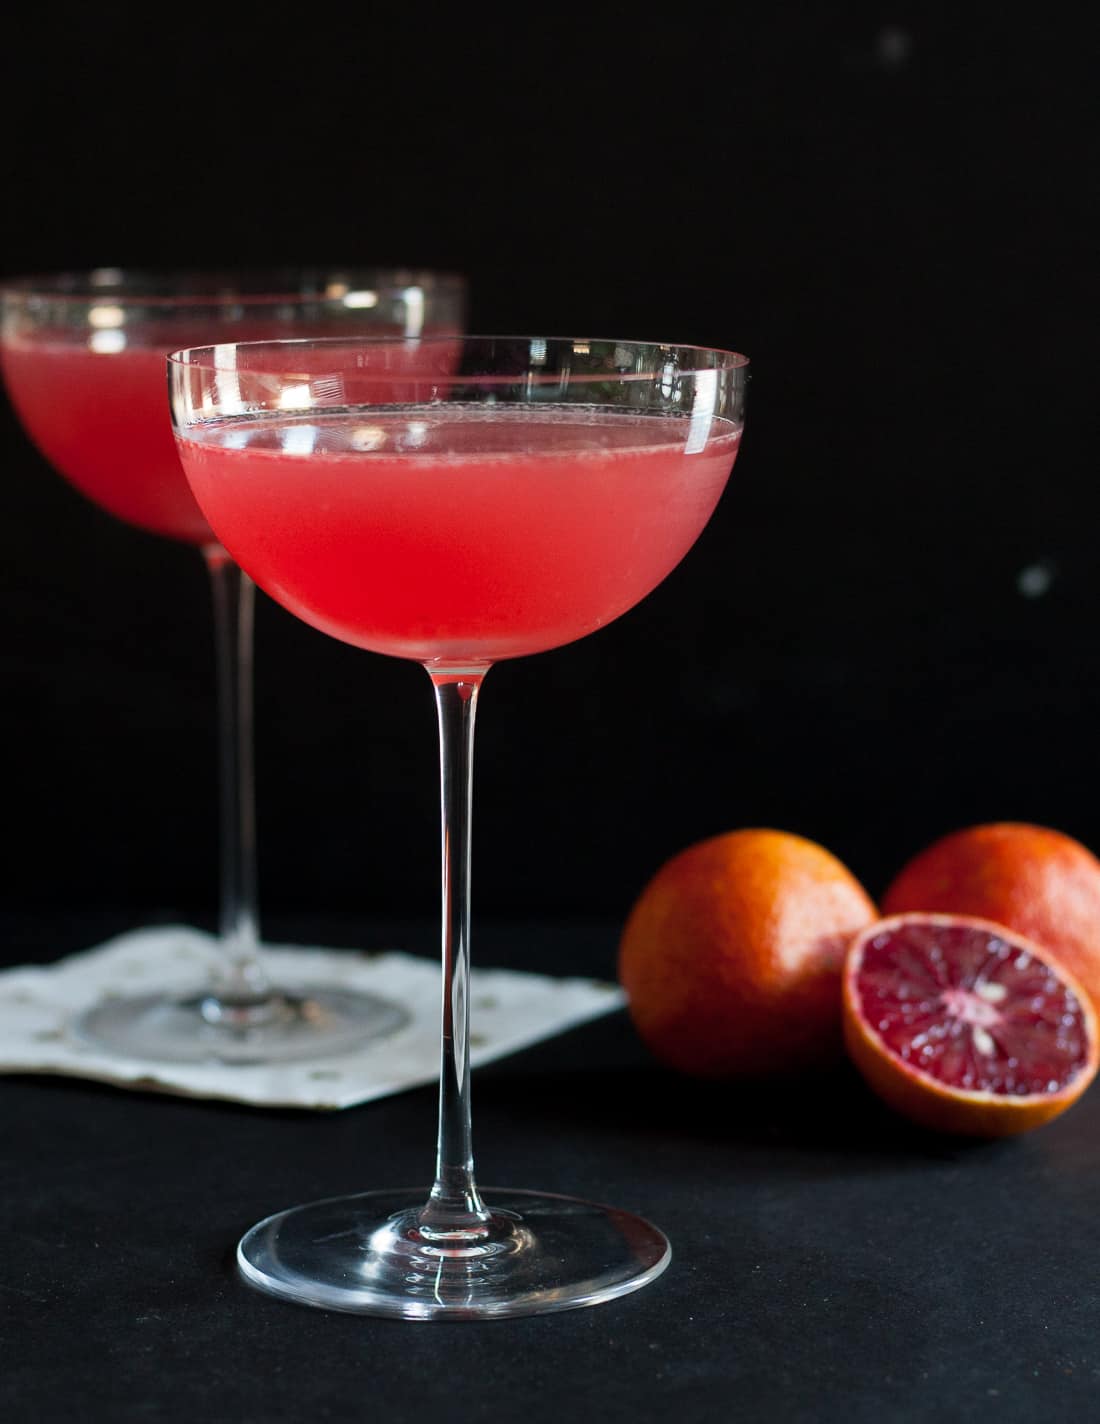 The blood orange vesper martini is a dramatic cocktail inspired by a classic espionage love story. * Recipe on GoodieGodmother.com